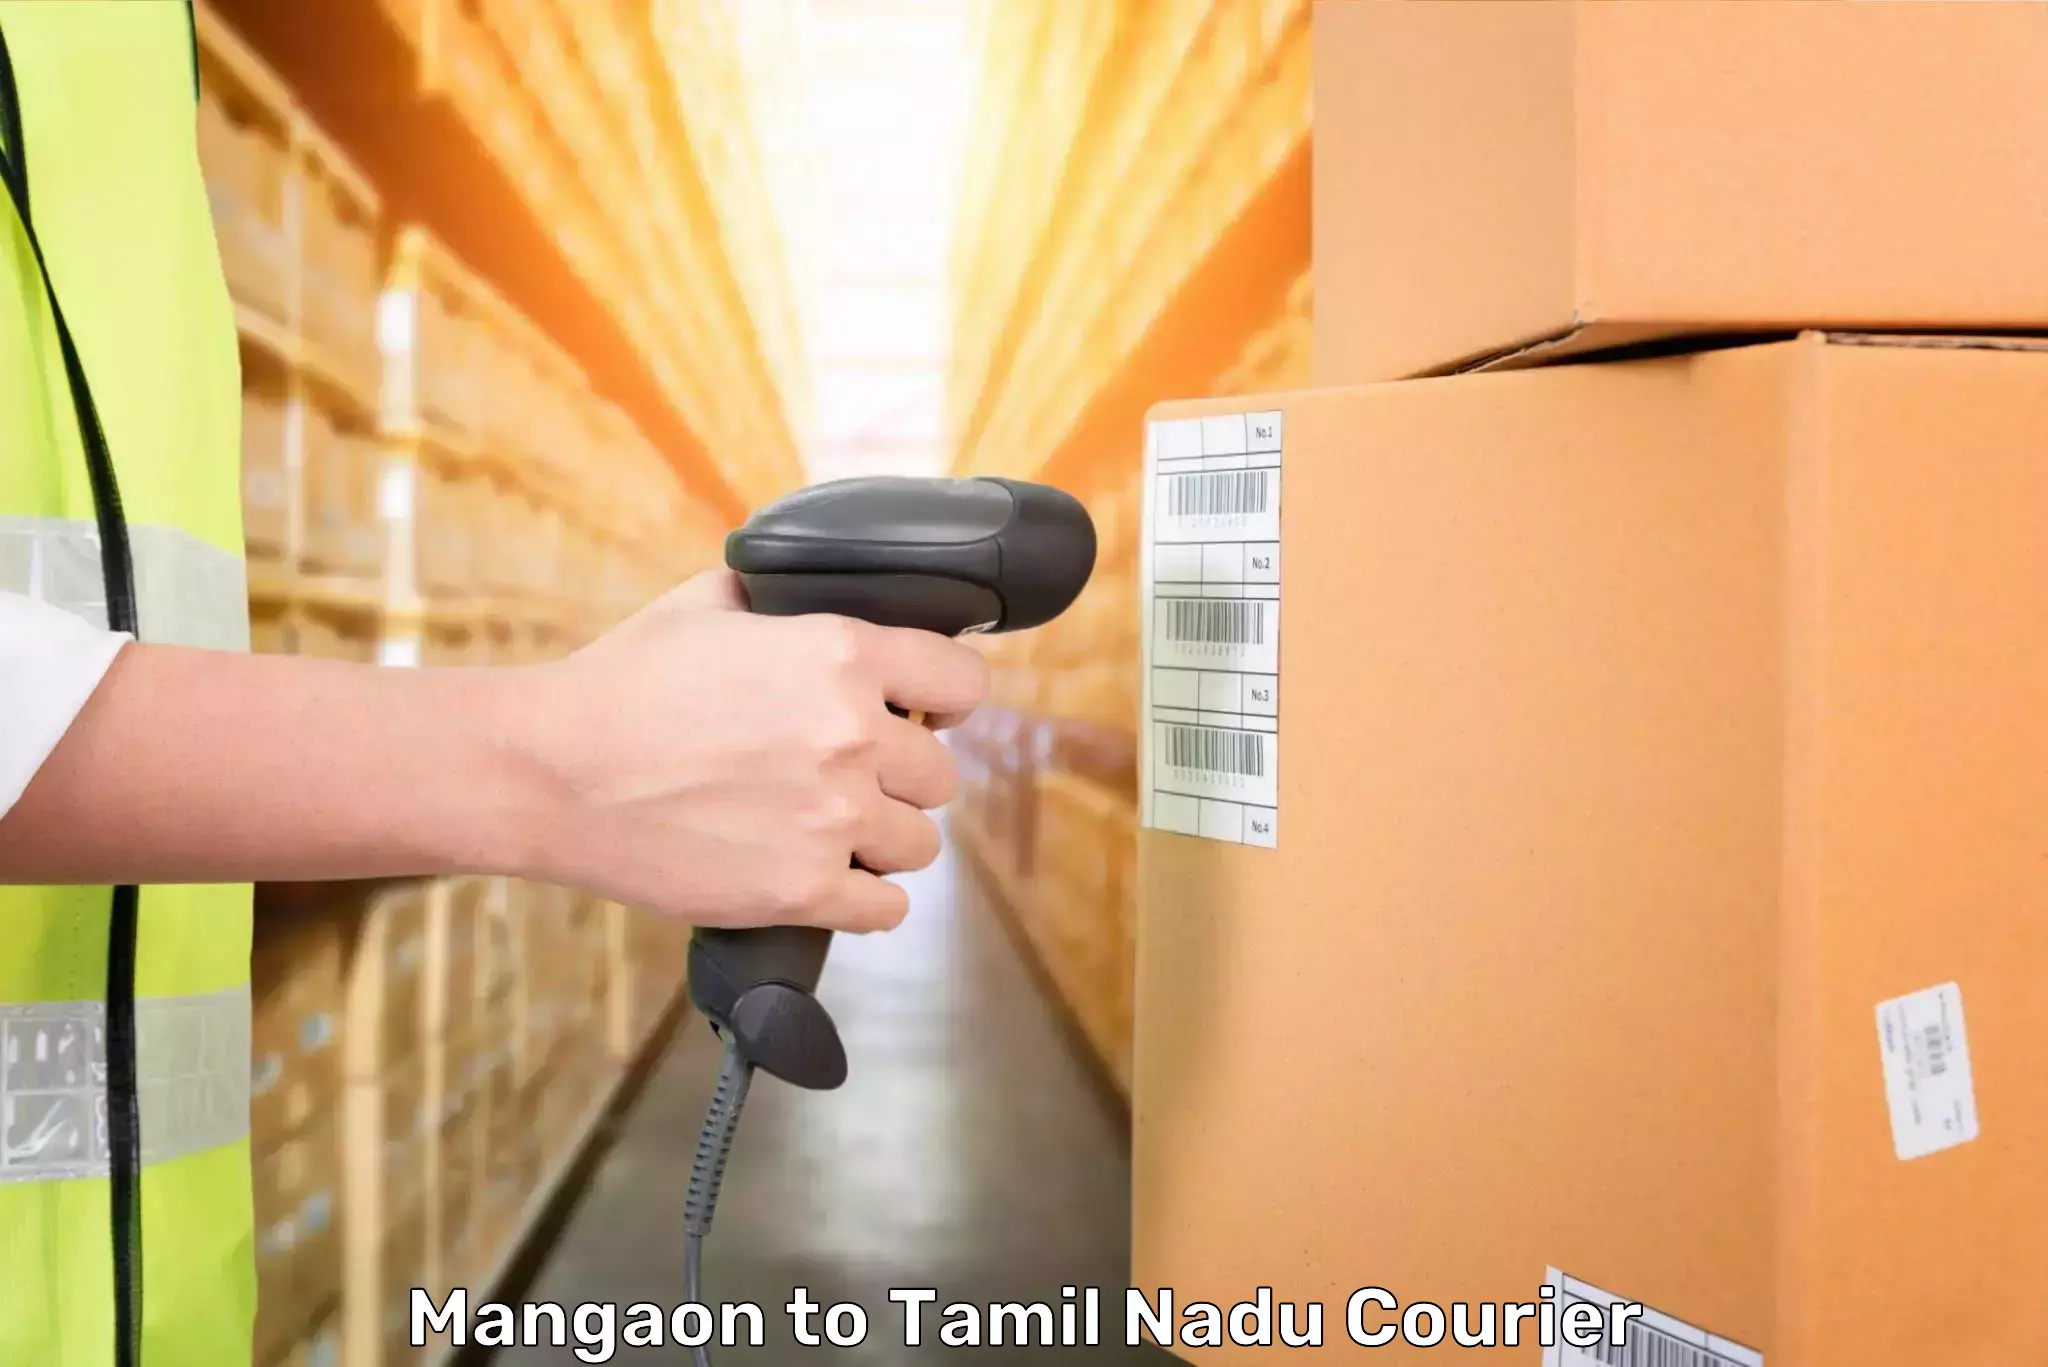 Luggage transport deals Mangaon to Shanmugha Arts Science Technology and Research Academy Thanjavur